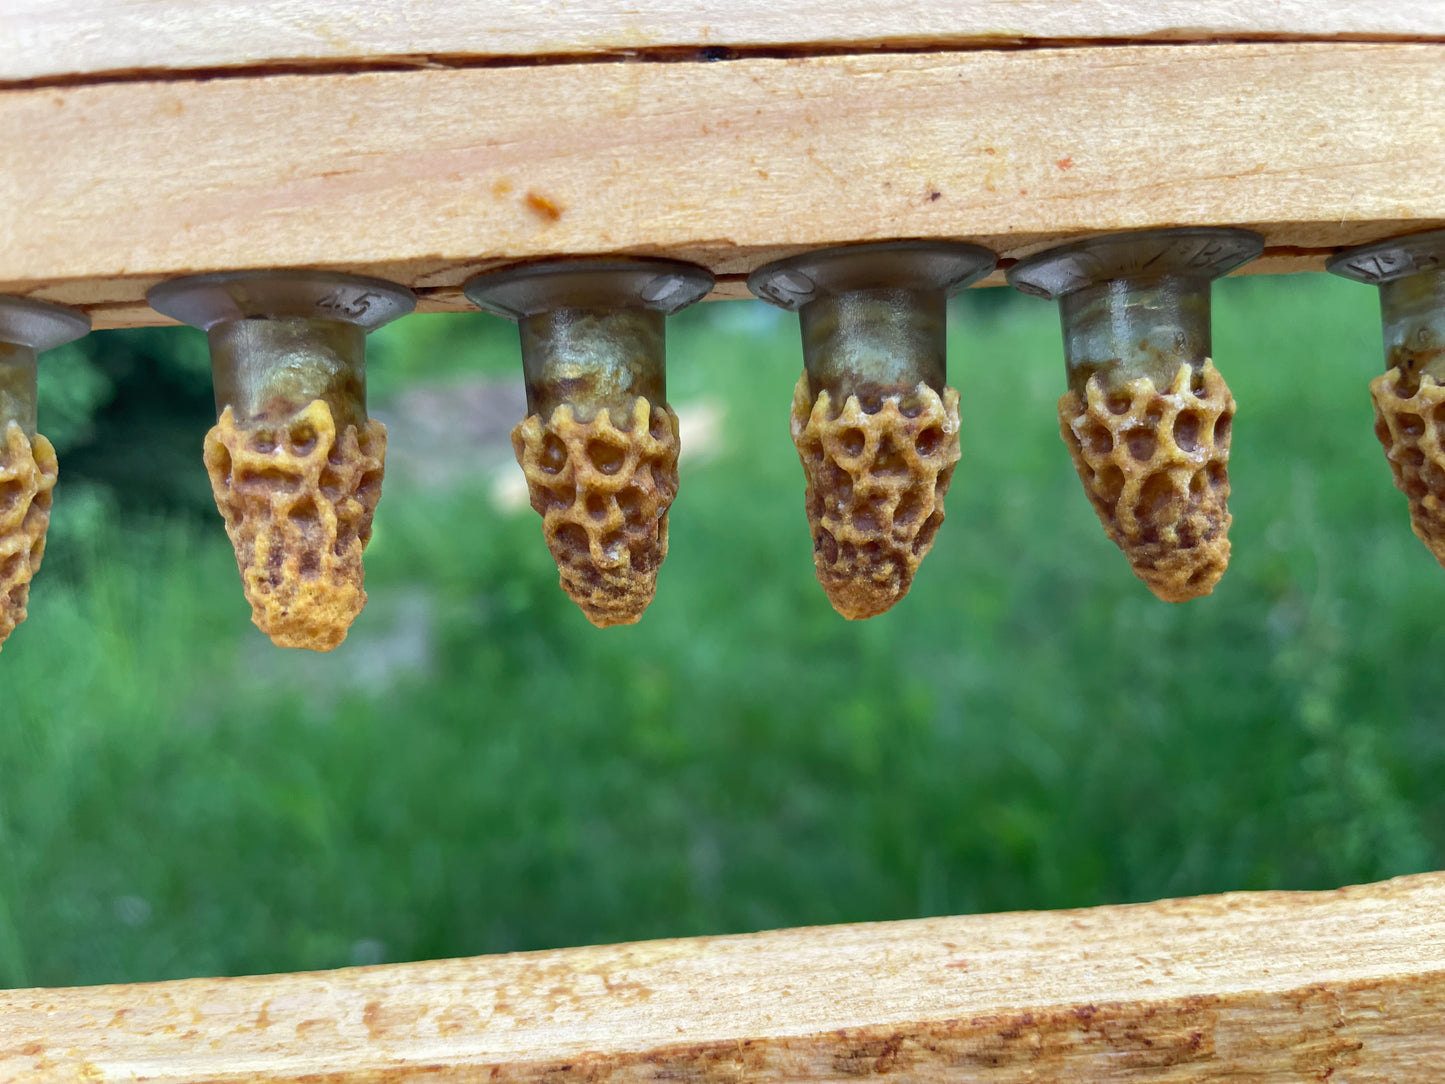 Assembled Double Box Kit with Bees